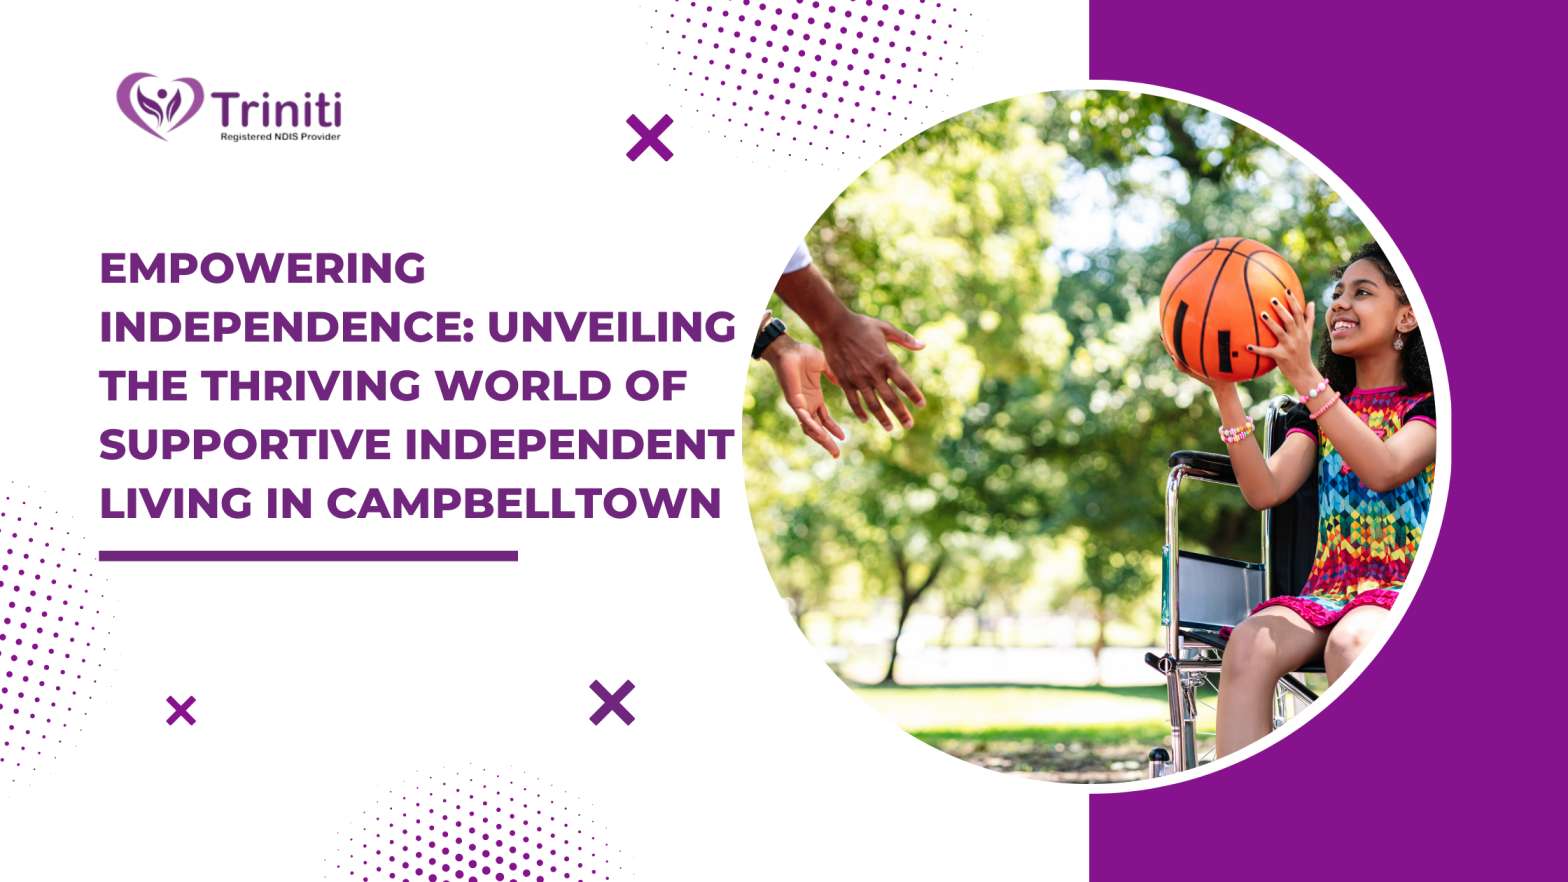 Empowering Independence: Unveiling the Thriving World of Support Independent Living in Campbelltown.